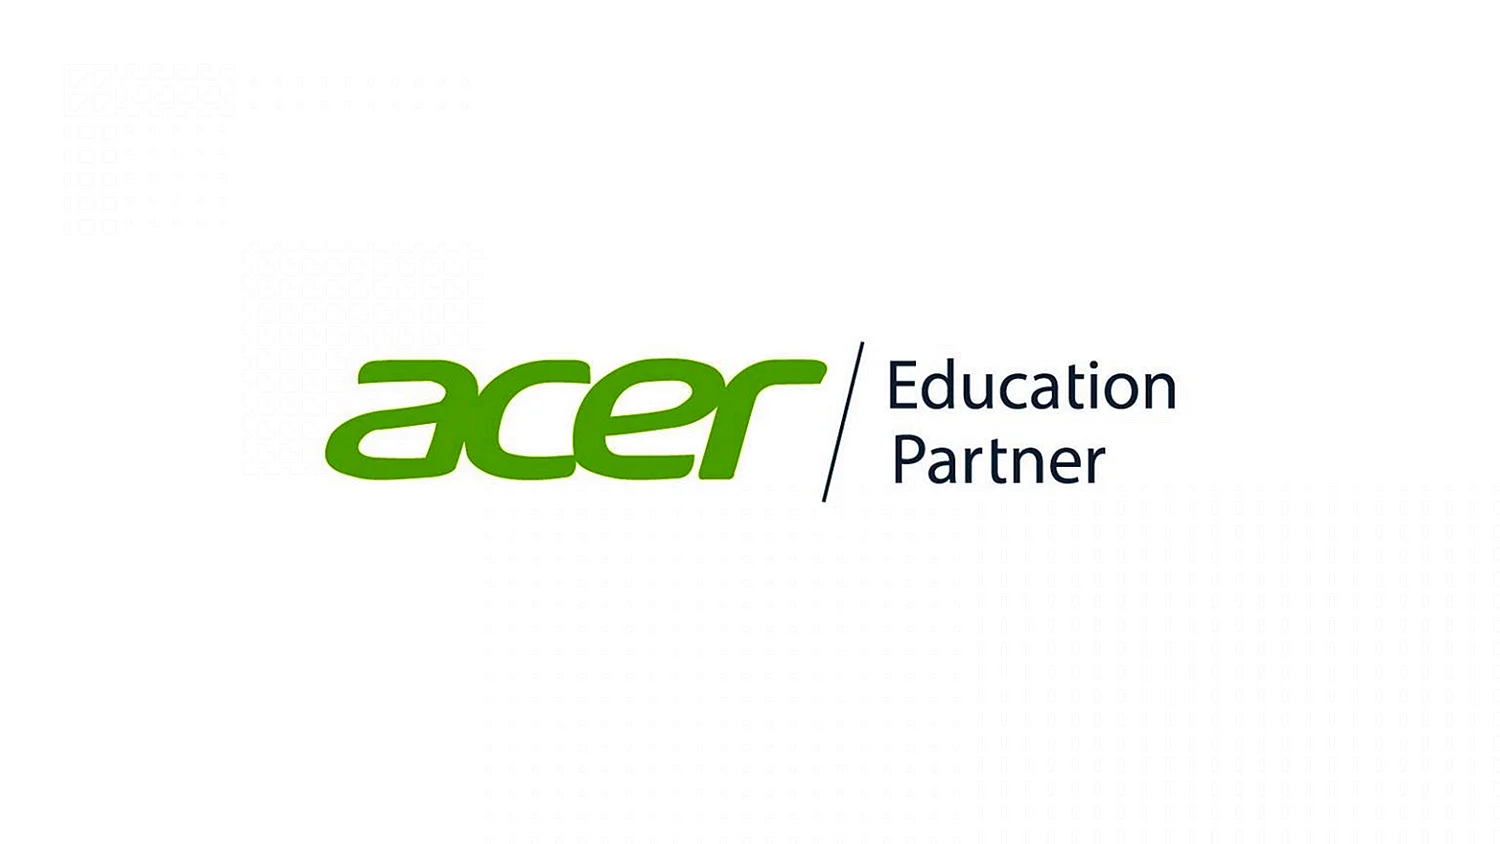 Шрифт Acer